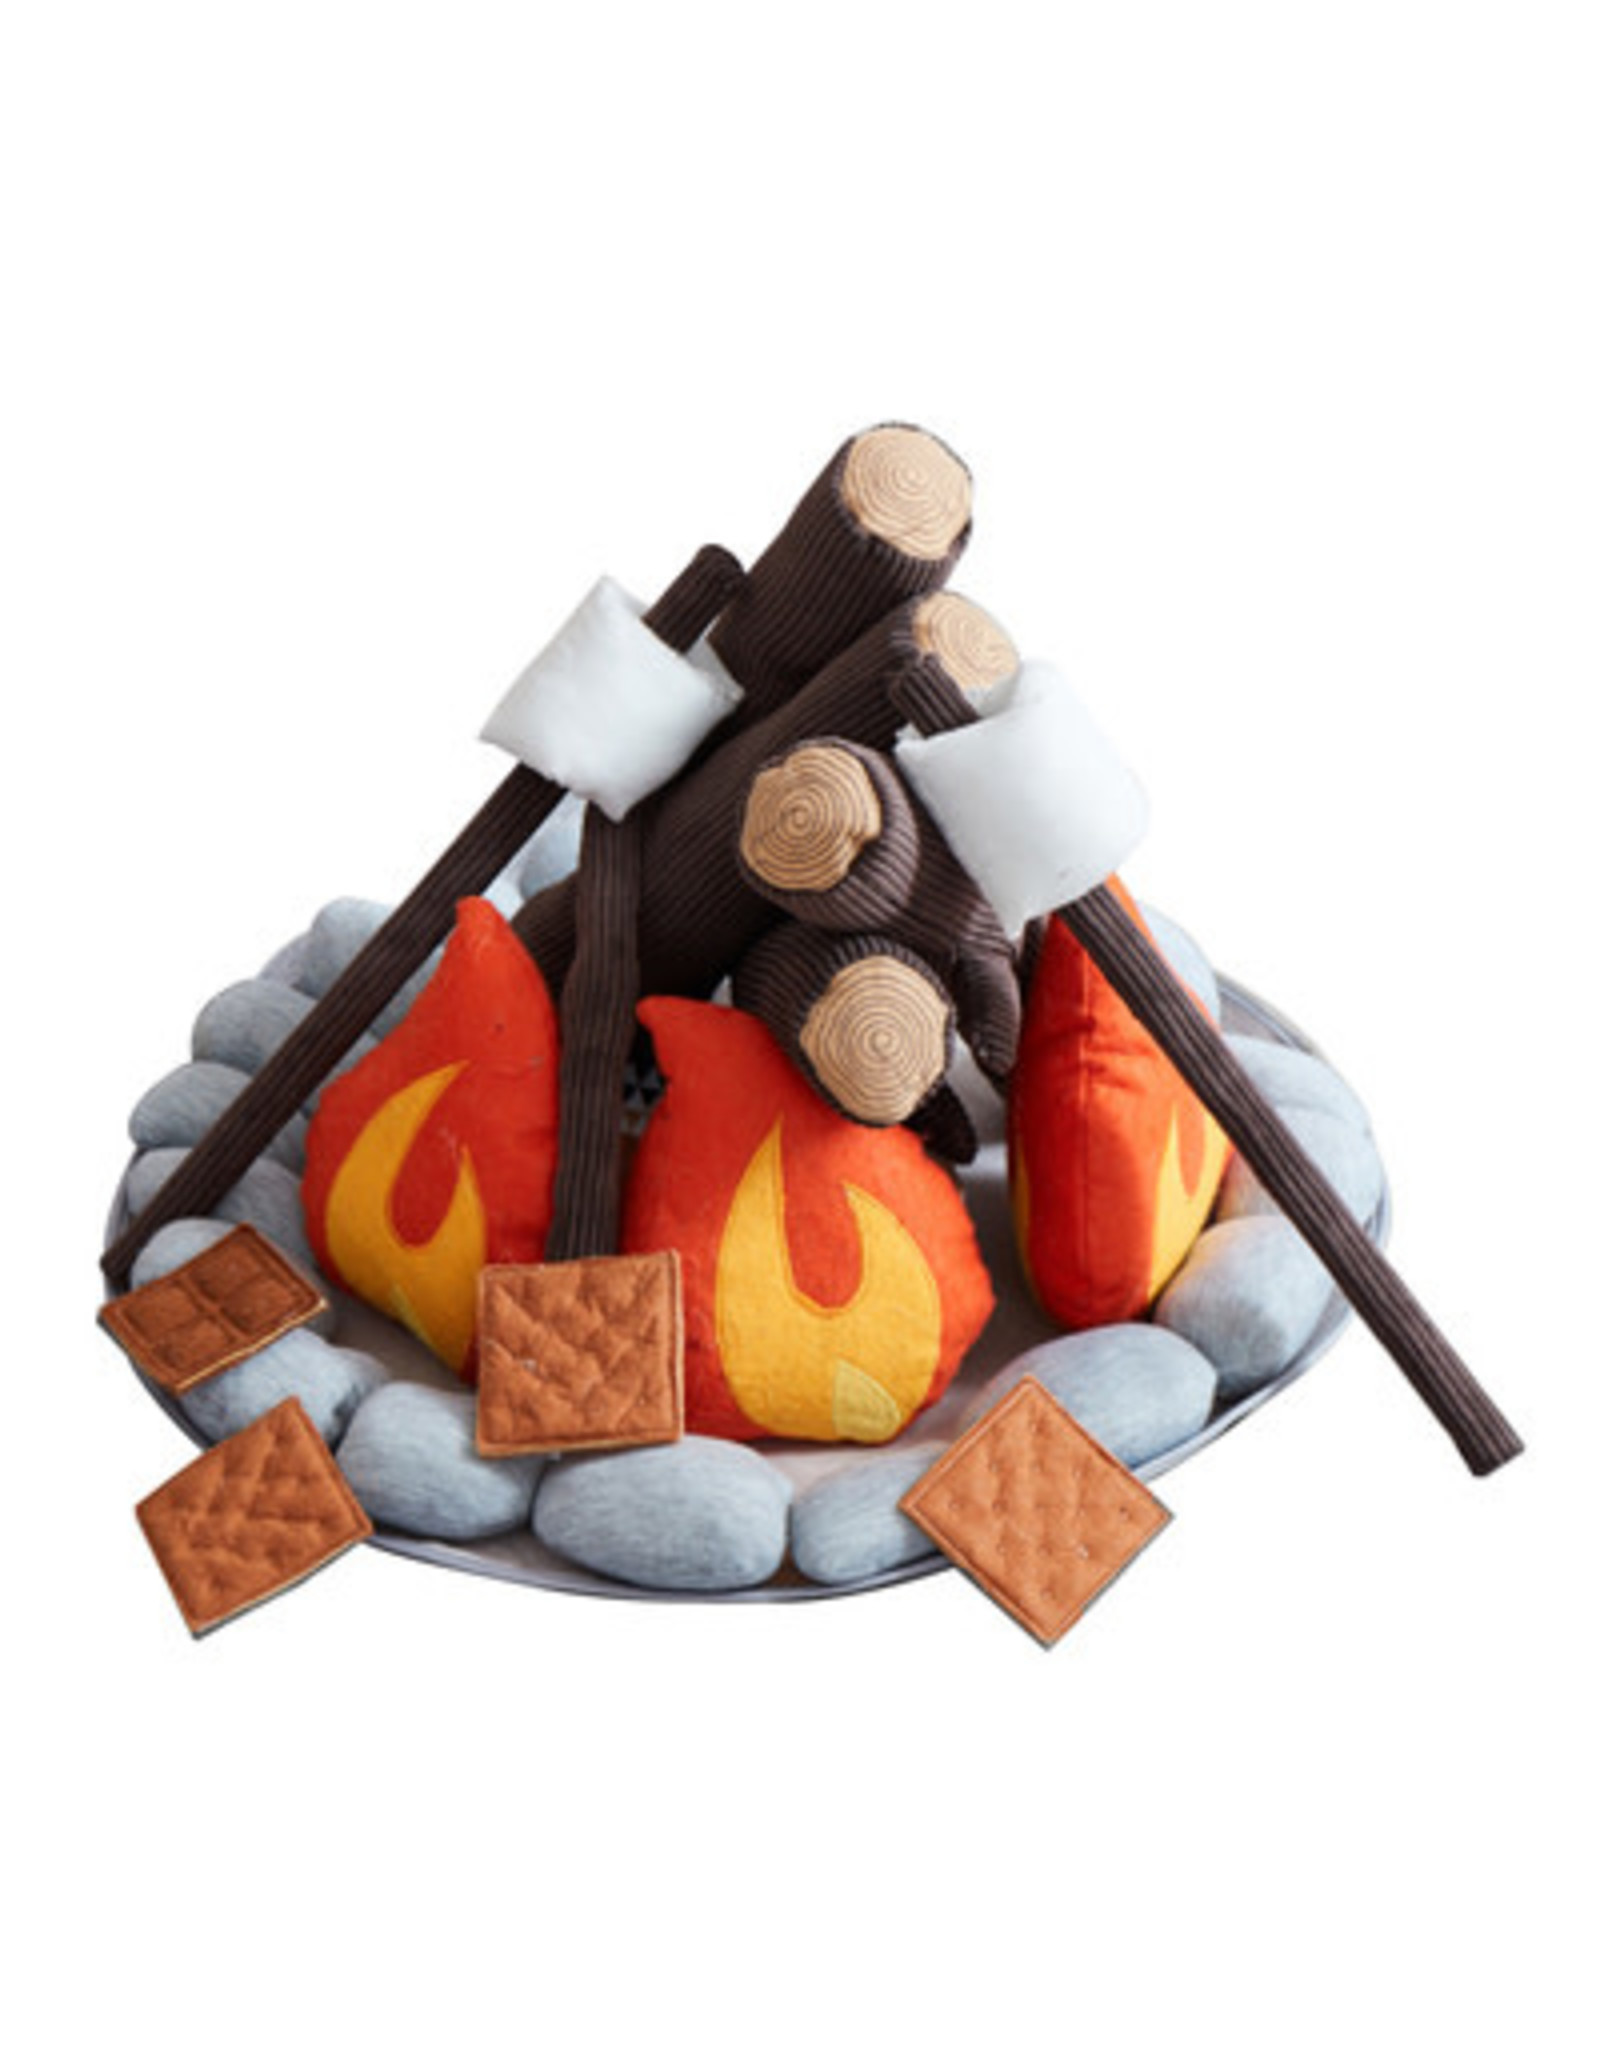 Asweets Campout Campfire & Smores